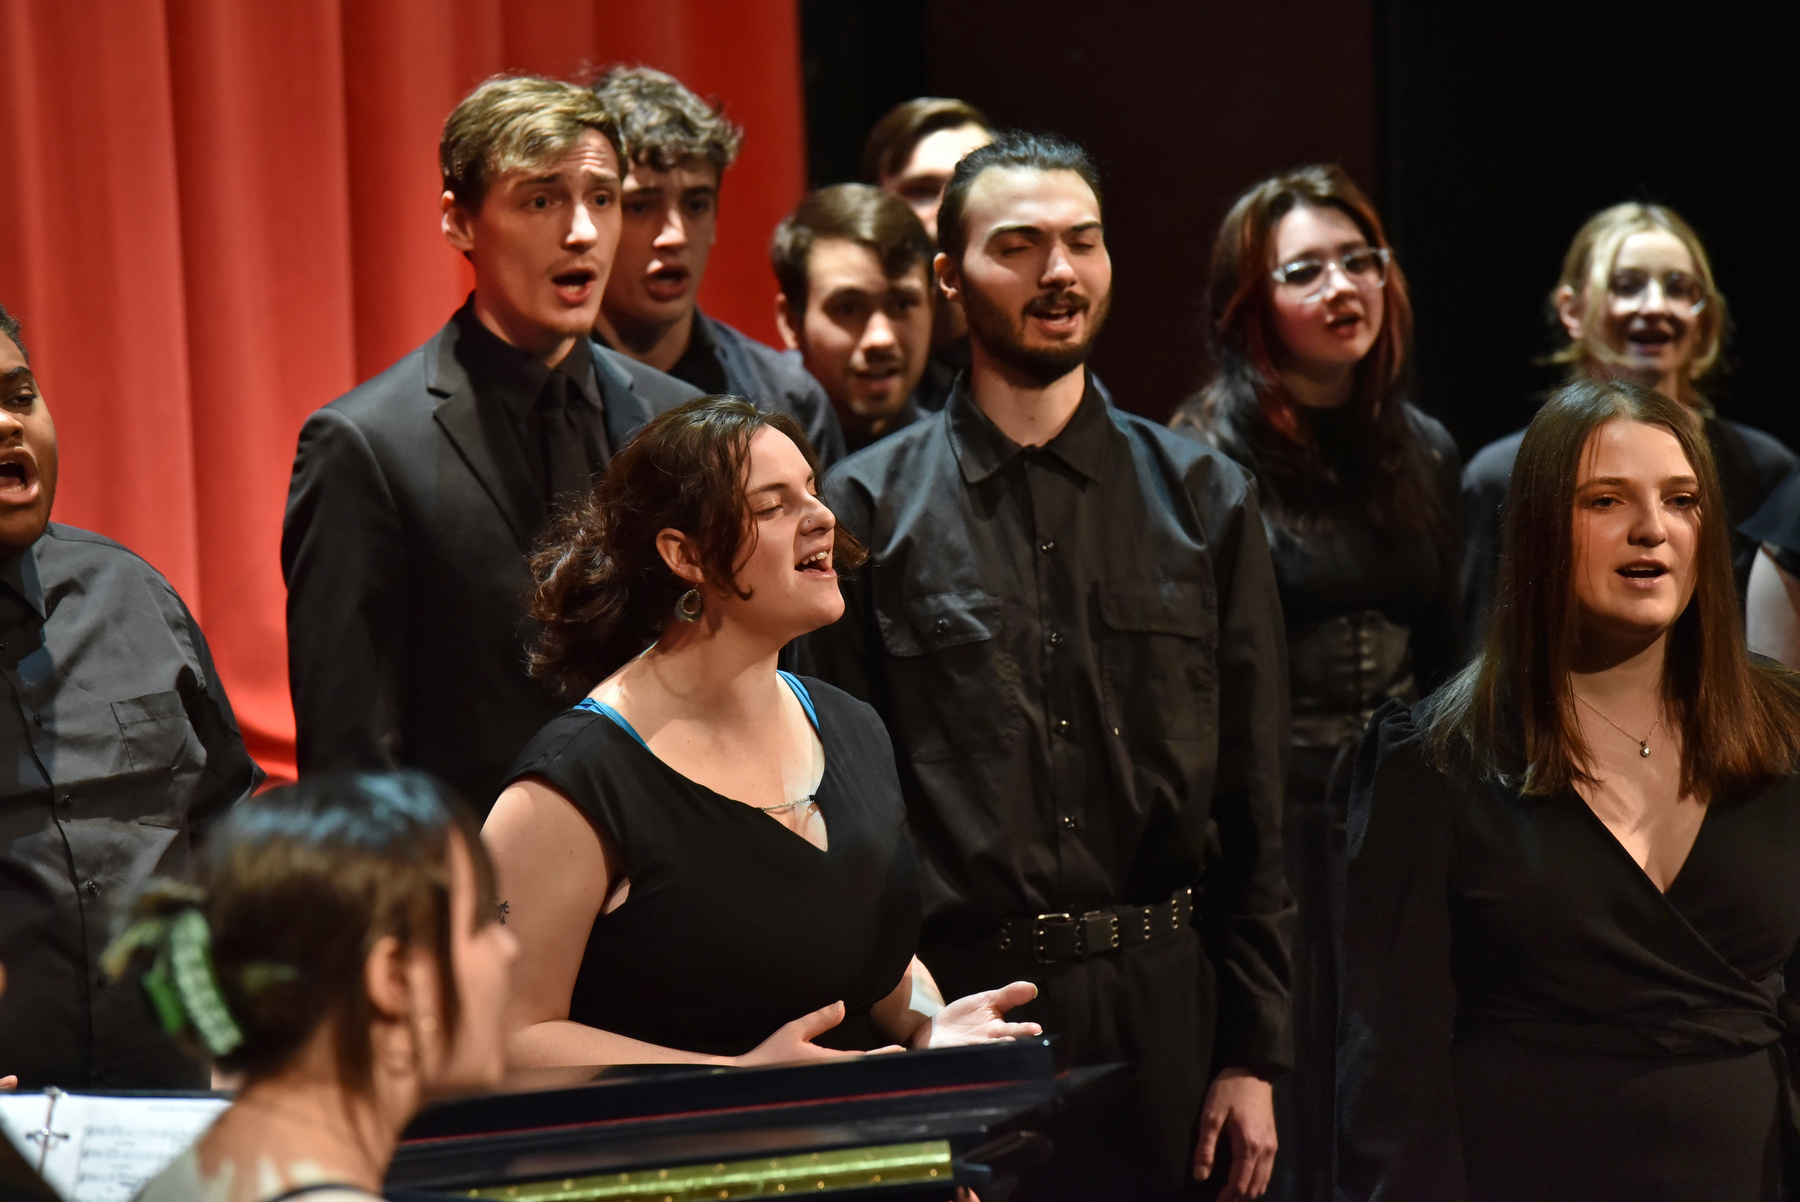 Oswego State Singers perform during the March 3 "Collage" Concert, held in Waterman Theatre, which featured student and faculty performers from the SUNY Oswego Department of Music performing a wide range of selections from jazz to classical and beyond. 